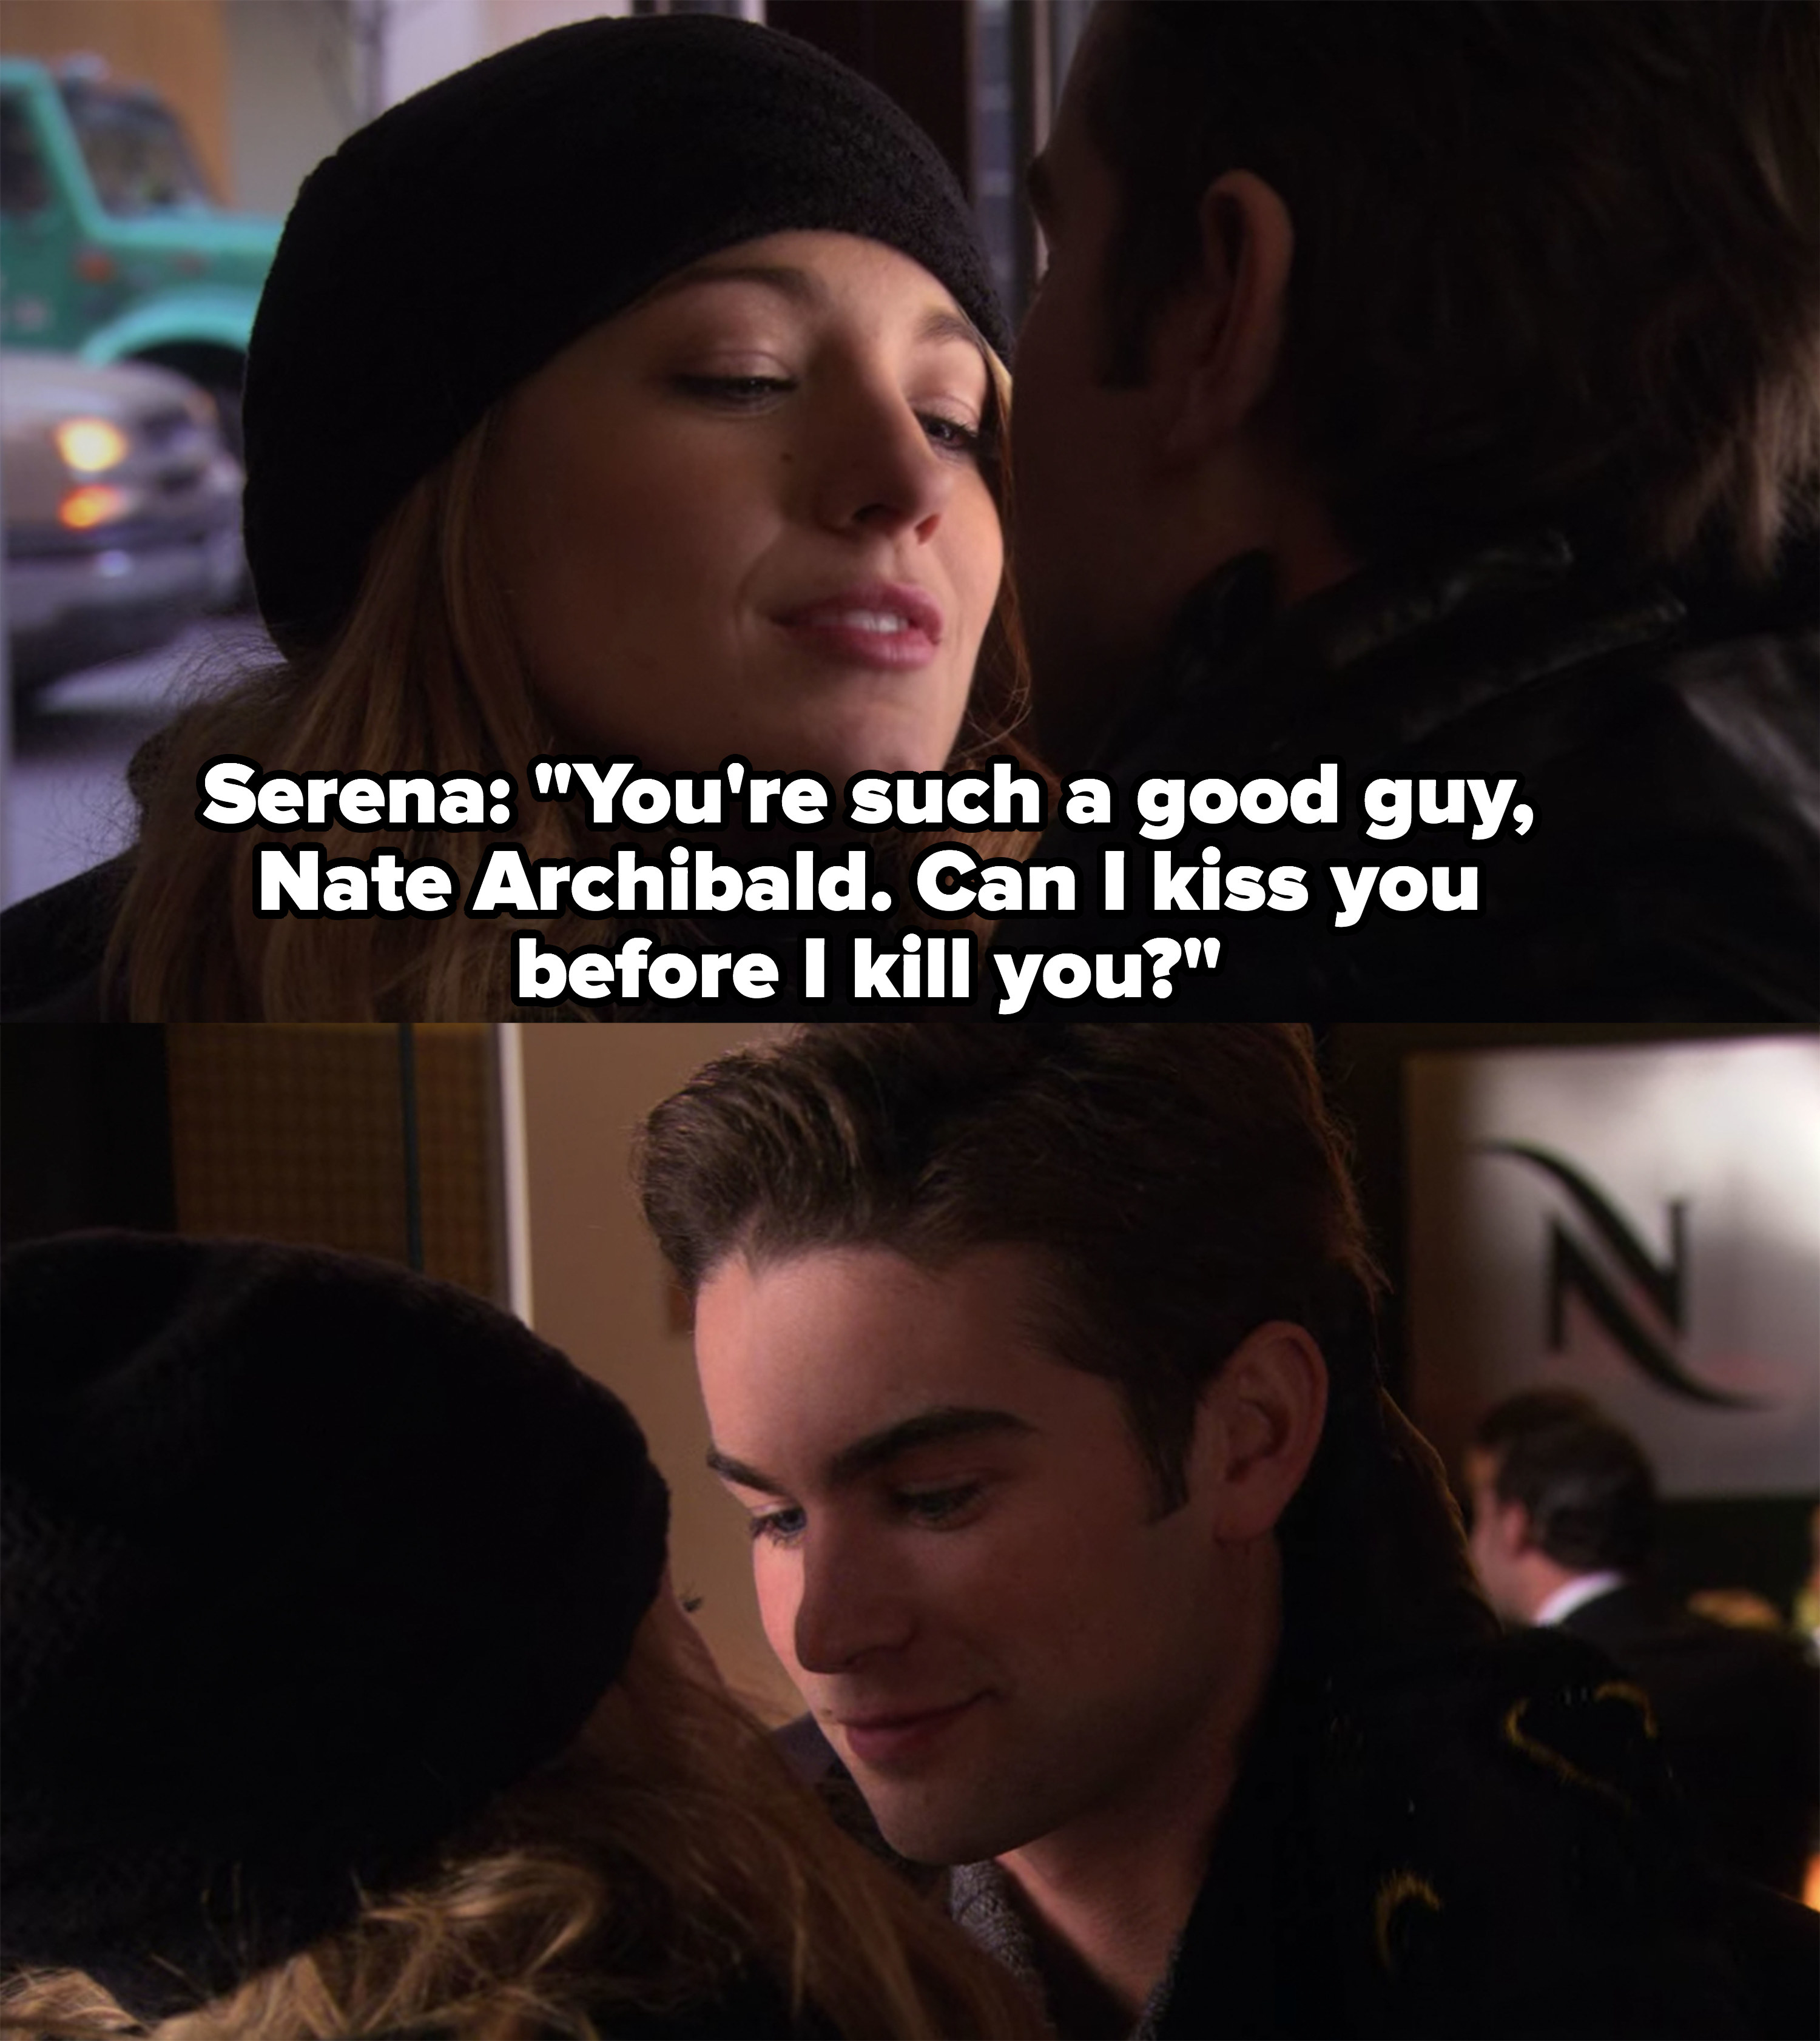 Serena: &quot;You&#x27;re such a good guy, can I kiss you before I kill you?&quot;